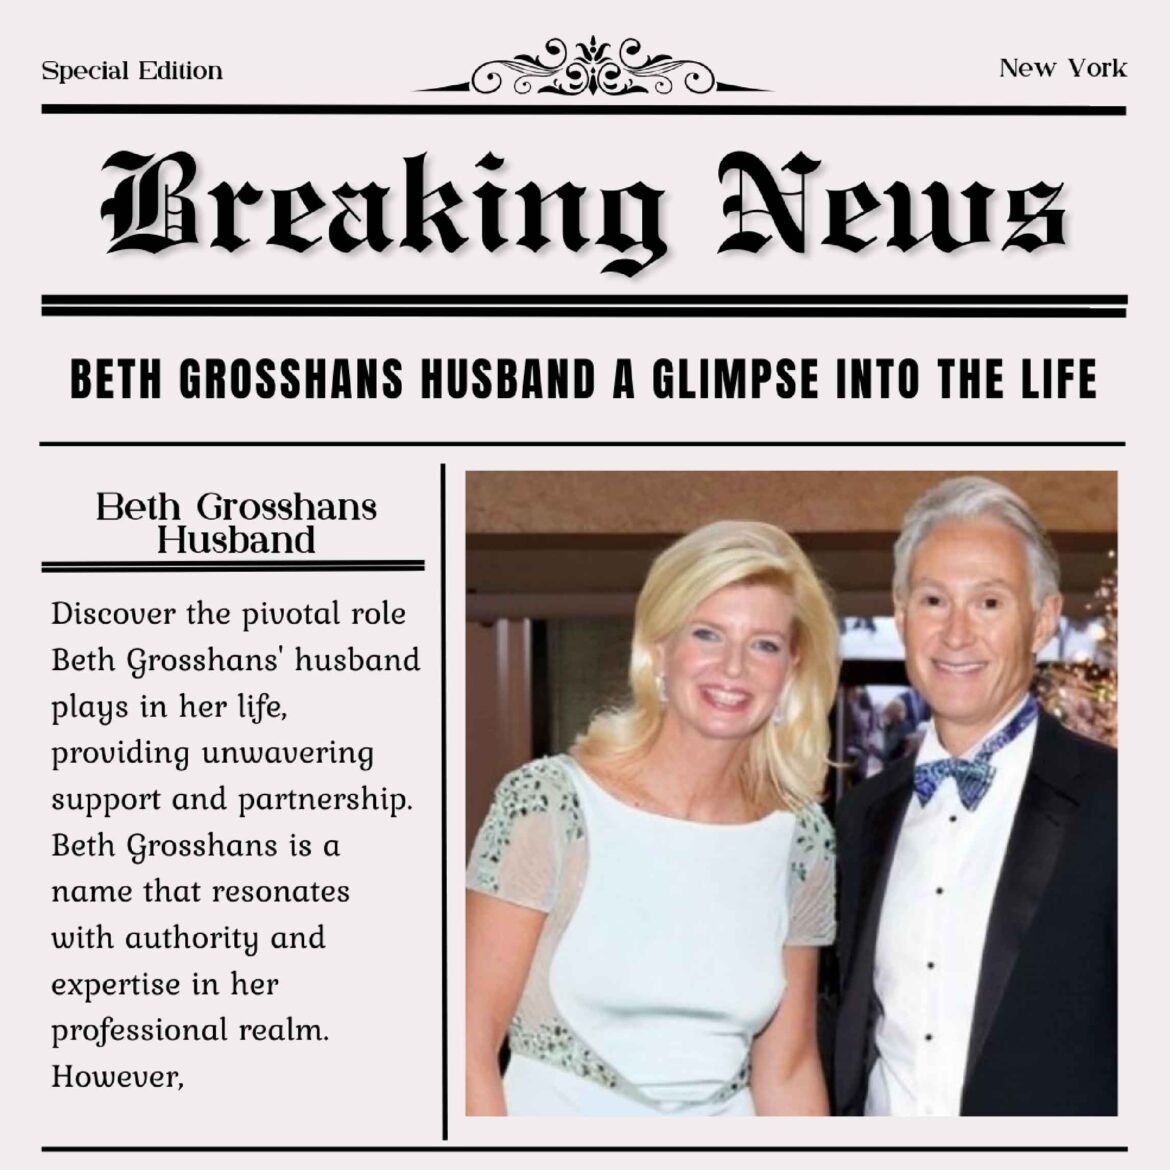 Beth Grosshans Husband A Glimpse into the Life of a Supportive Partner